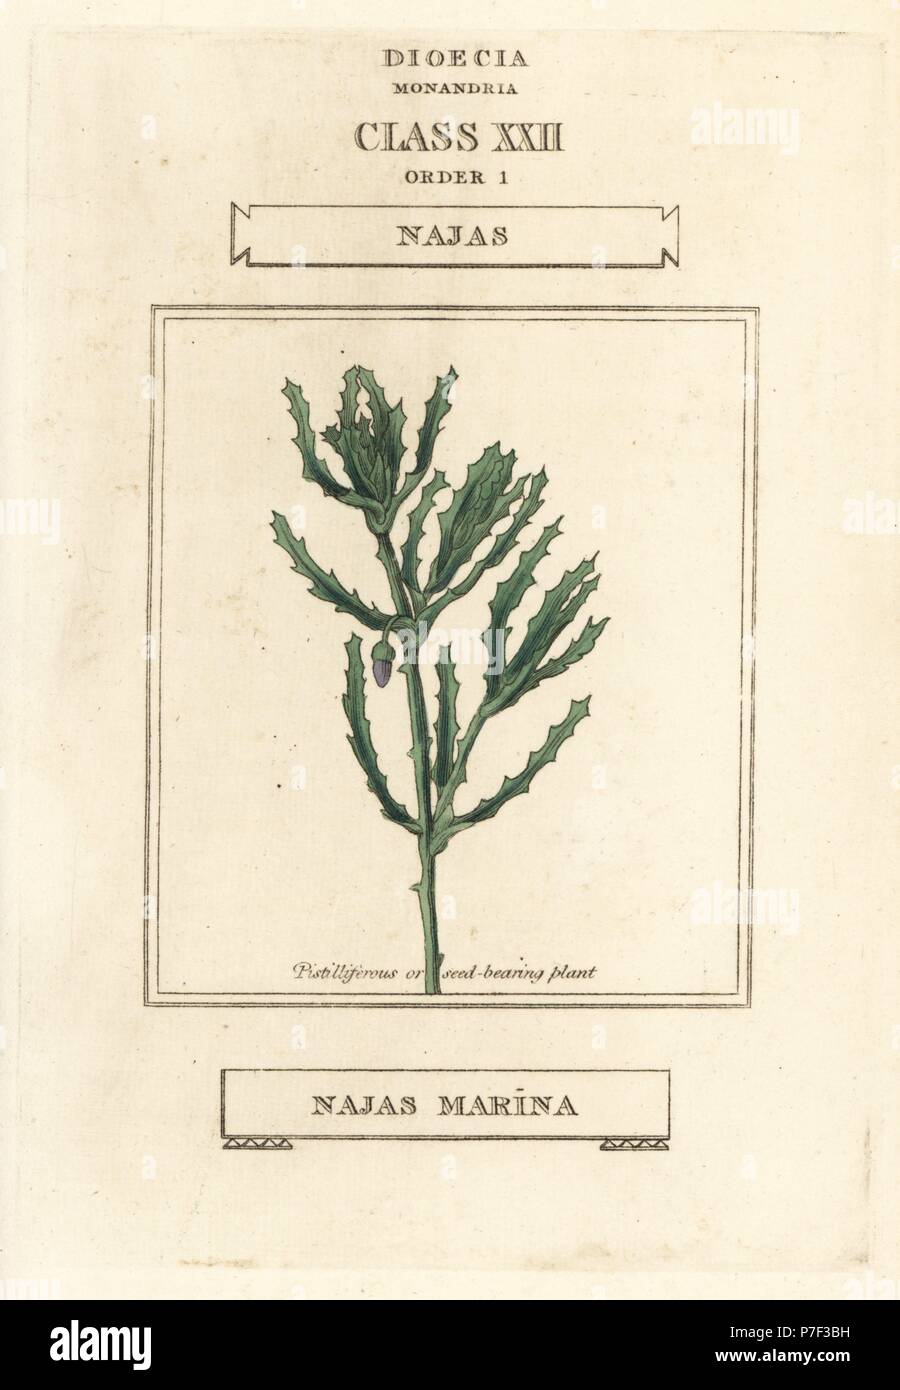 Spiny naiad, Najas marina. Handcoloured copperplate engraving after an illustration by Richard Duppa from his The Classes and Orders of the Linnaean System of Botany, Longman, Hurst, London, 1816. Stock Photo